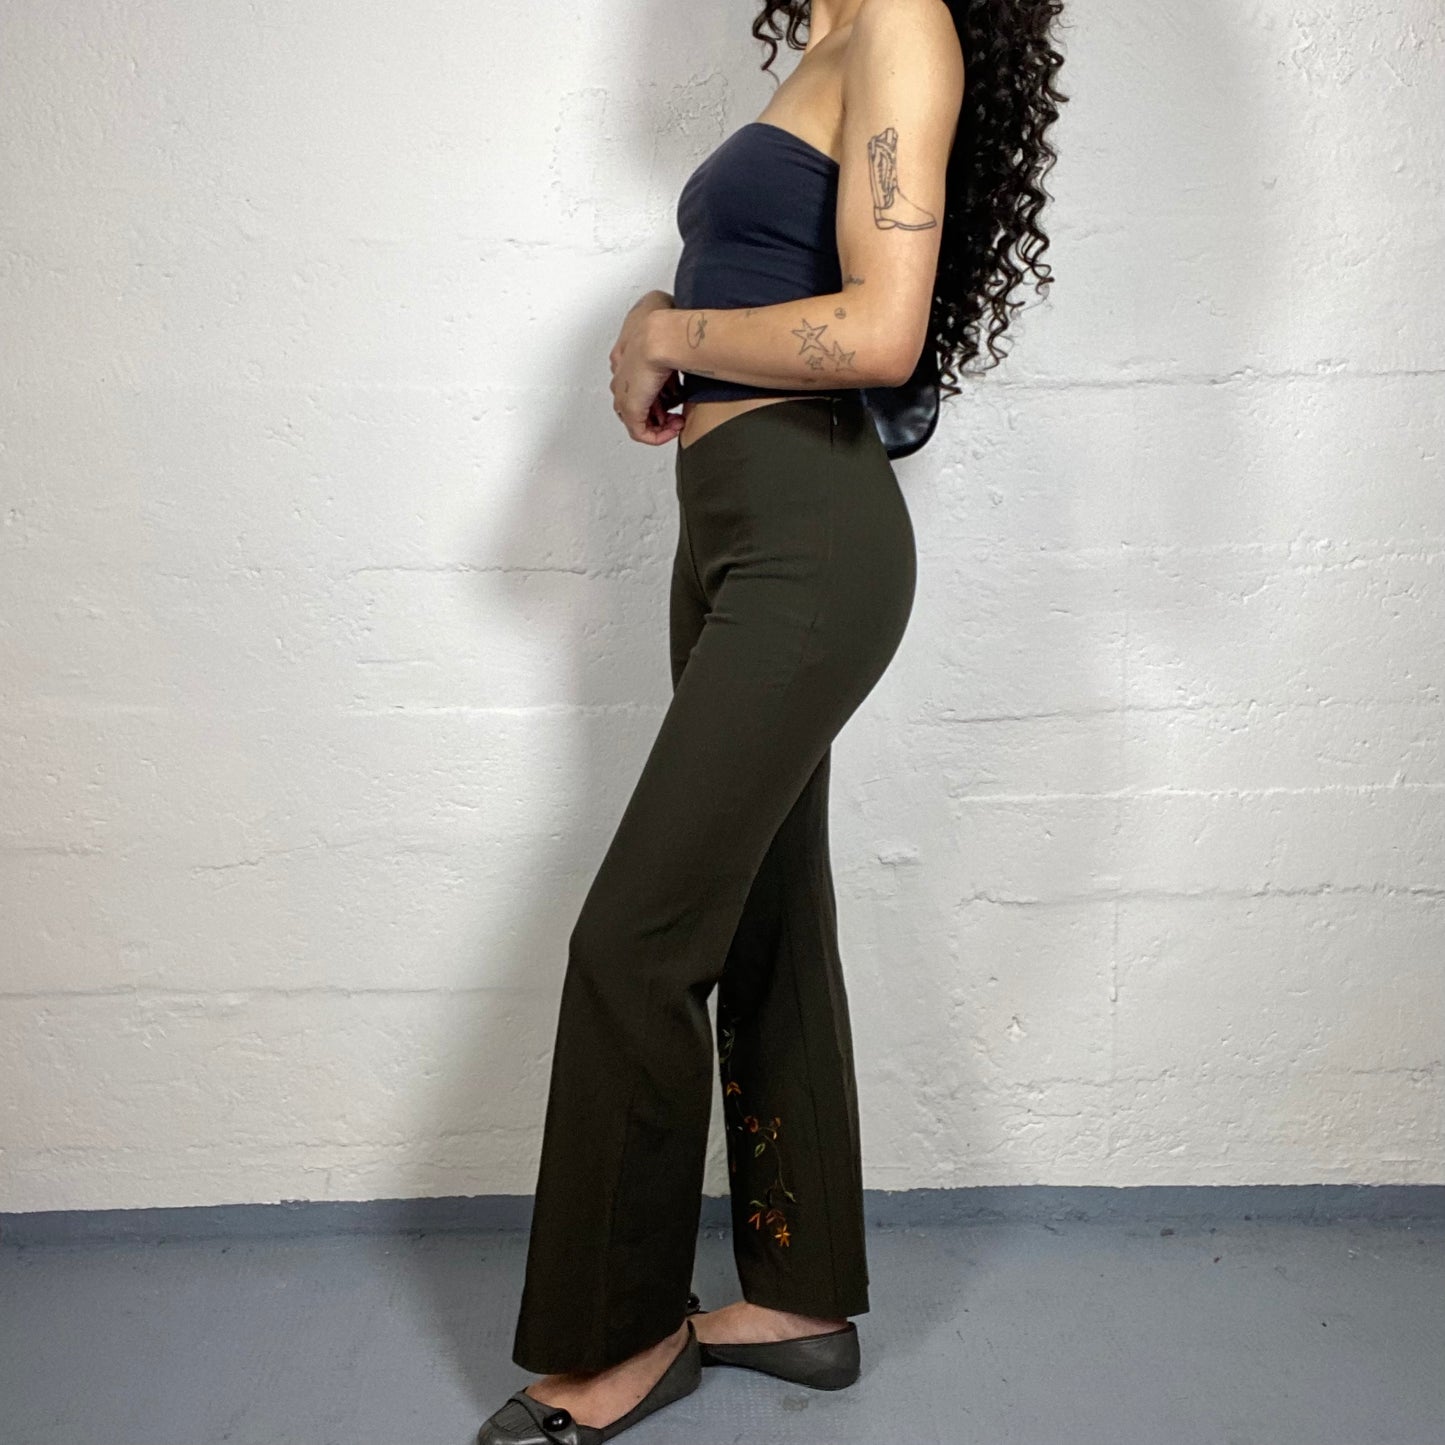 Vintage 2000's Romantic Khaki Green Bootcut High Waisted Pants with Floral Embroidery (M)